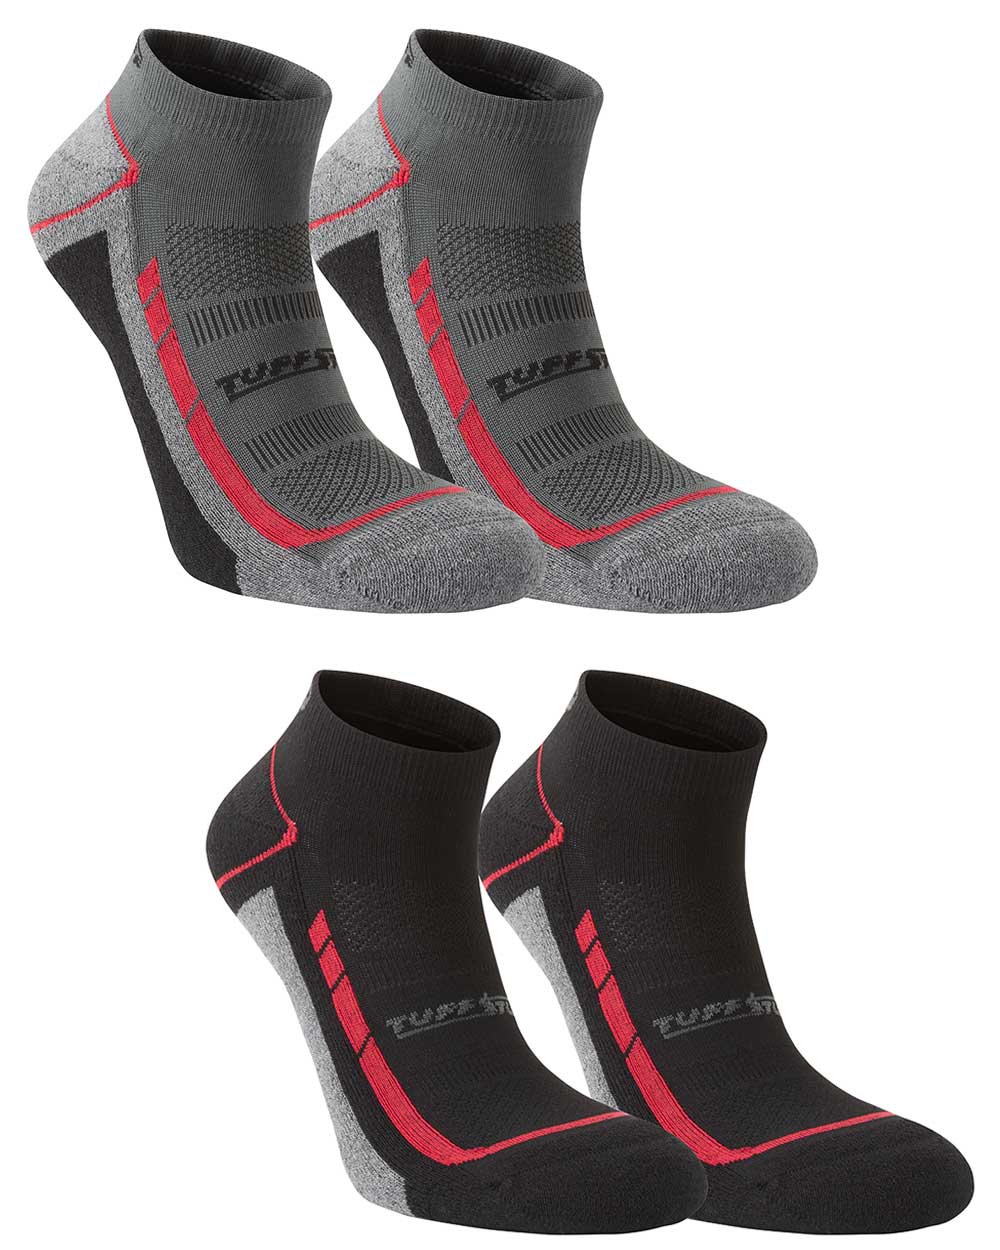 The TuffStuff Elite Low Cut Socks in Grey and Red, and Black and Grey